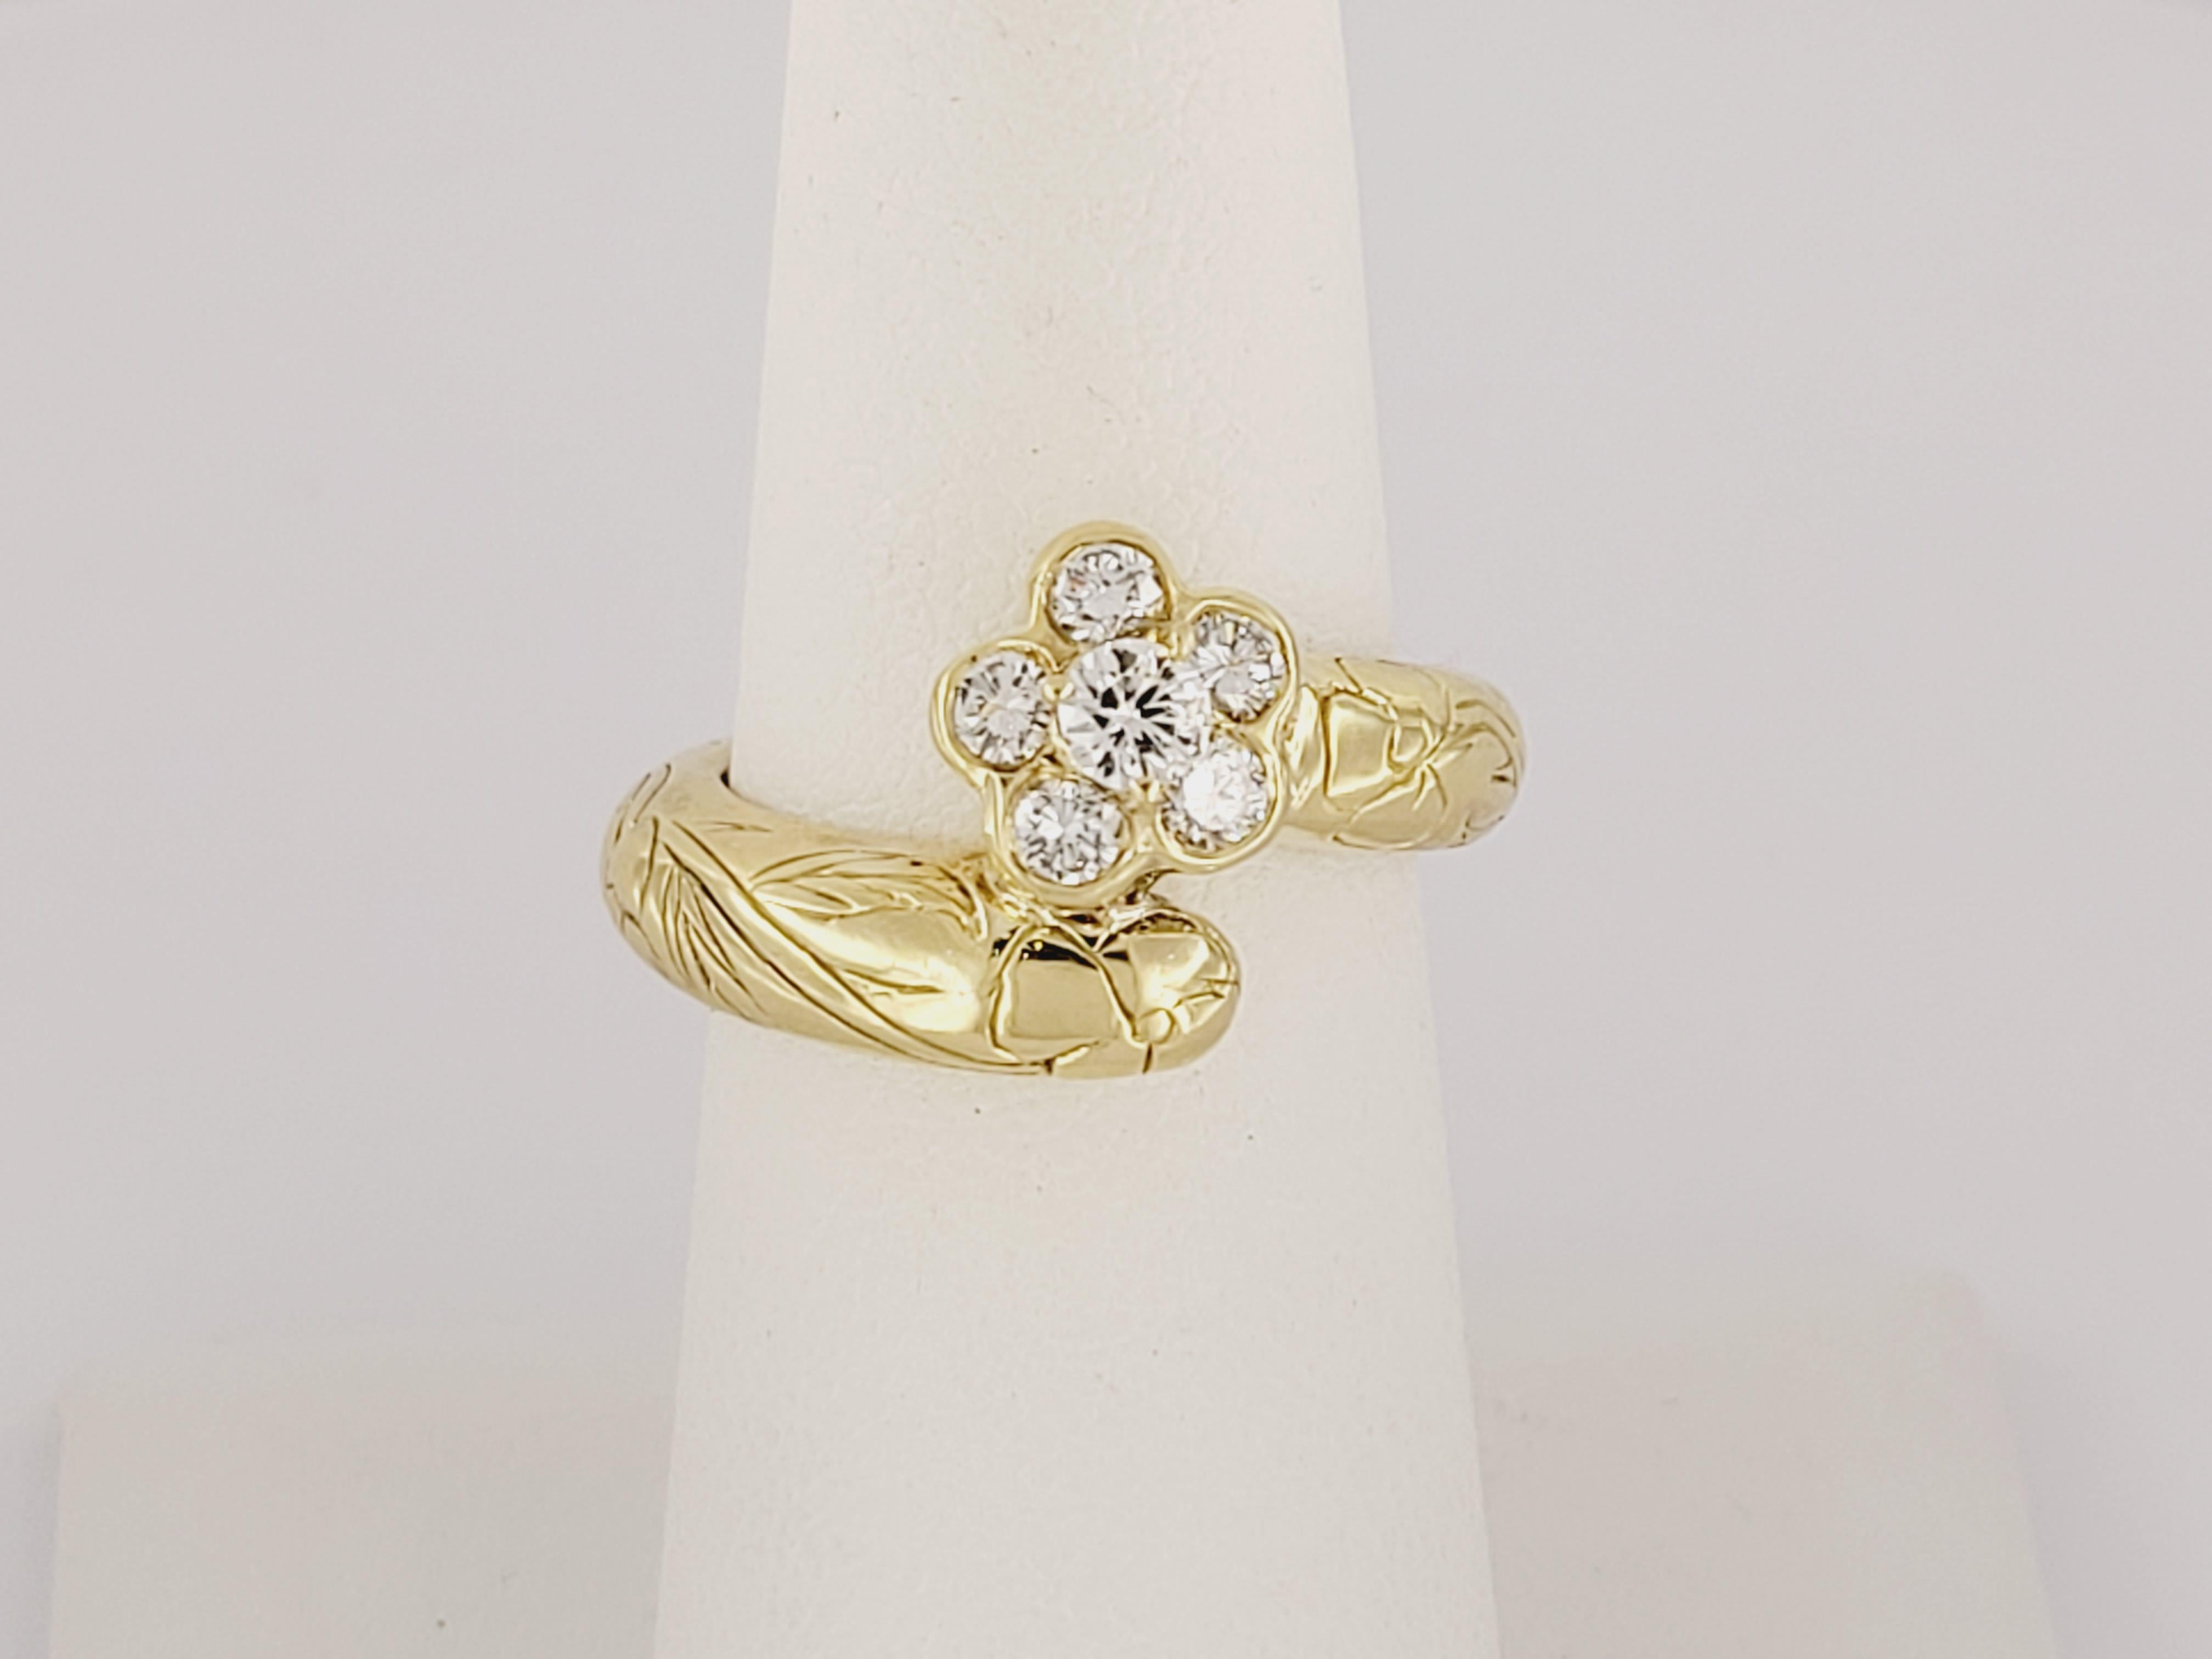 Vintage  Mdviani  Ring From Before 2000
18K Yellow Gold Ring with Diamond Flower
Diamond Clarity VS Color Grade F
There Six Diamonds .65ctw
Ring Size 6.5 
Ring Weight 9.7gr
Mint Condition, Like New
Retail price$4900